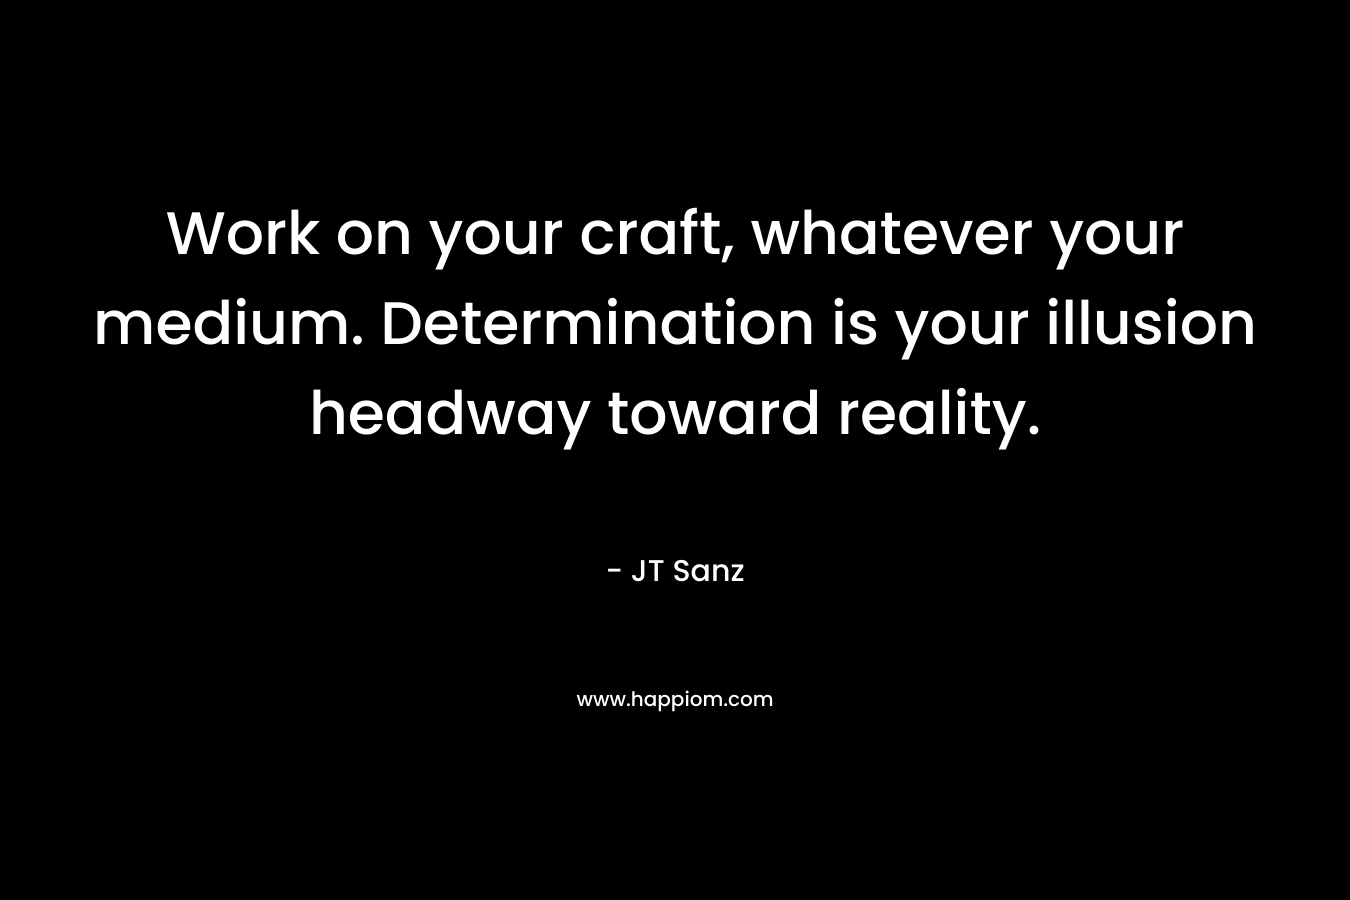 Work on your craft, whatever your medium. Determination is your illusion headway toward reality.